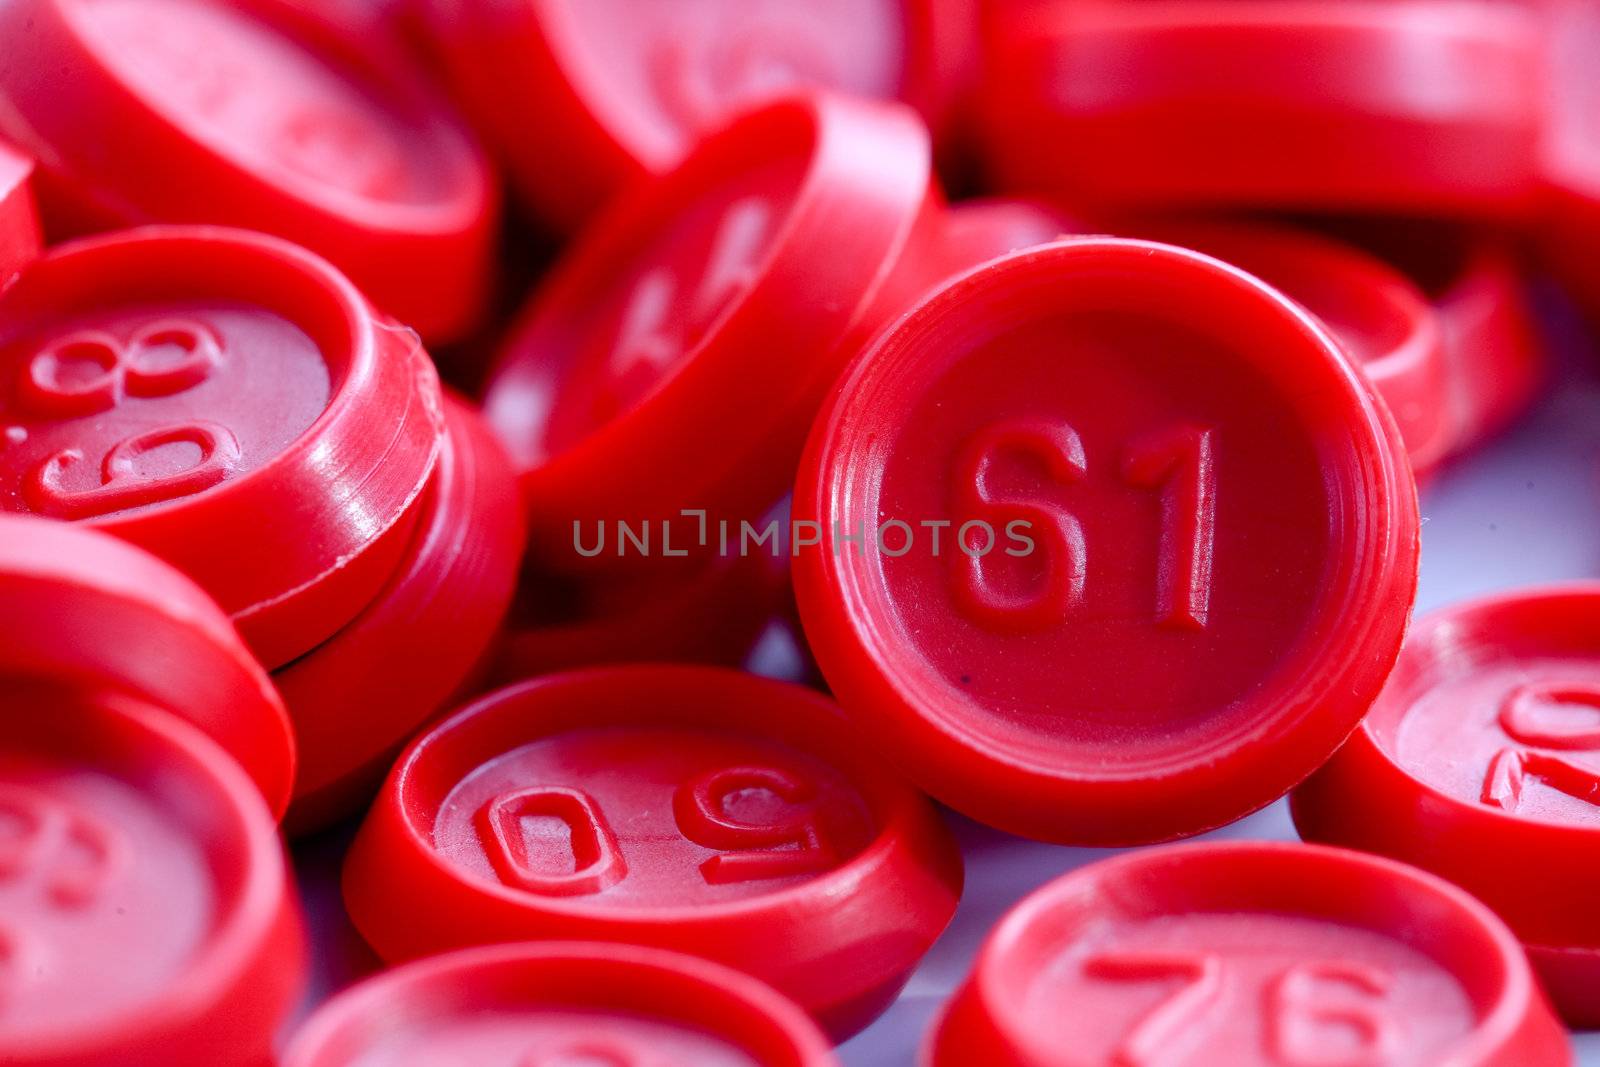 An image of red bingo game chips closeup